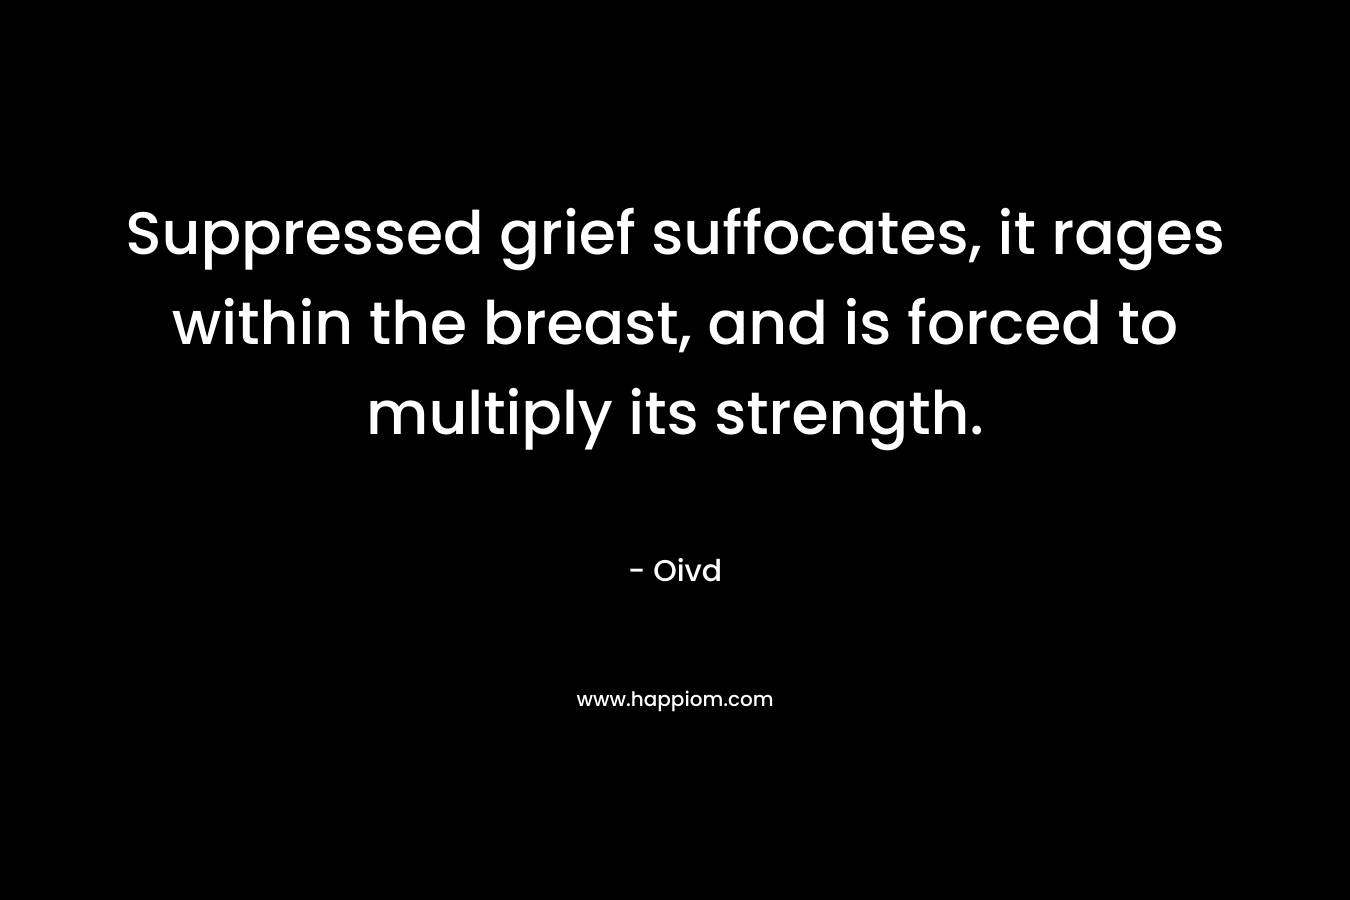 Suppressed grief suffocates, it rages within the breast, and is forced to multiply its strength.